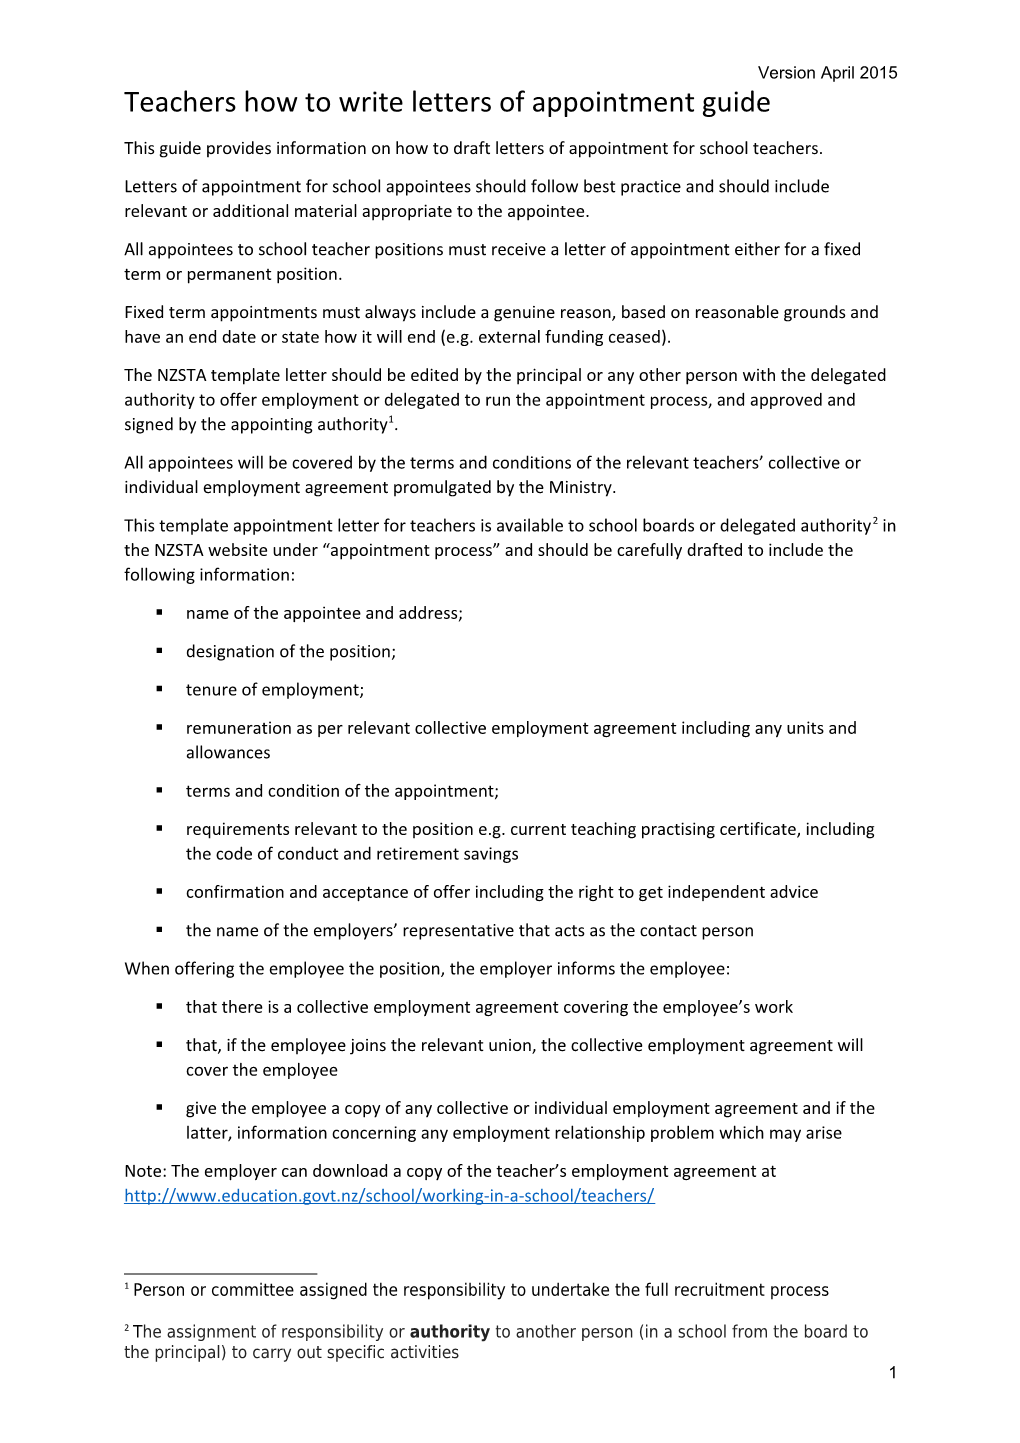 Teachers How to Write Letters of Appointment Guide